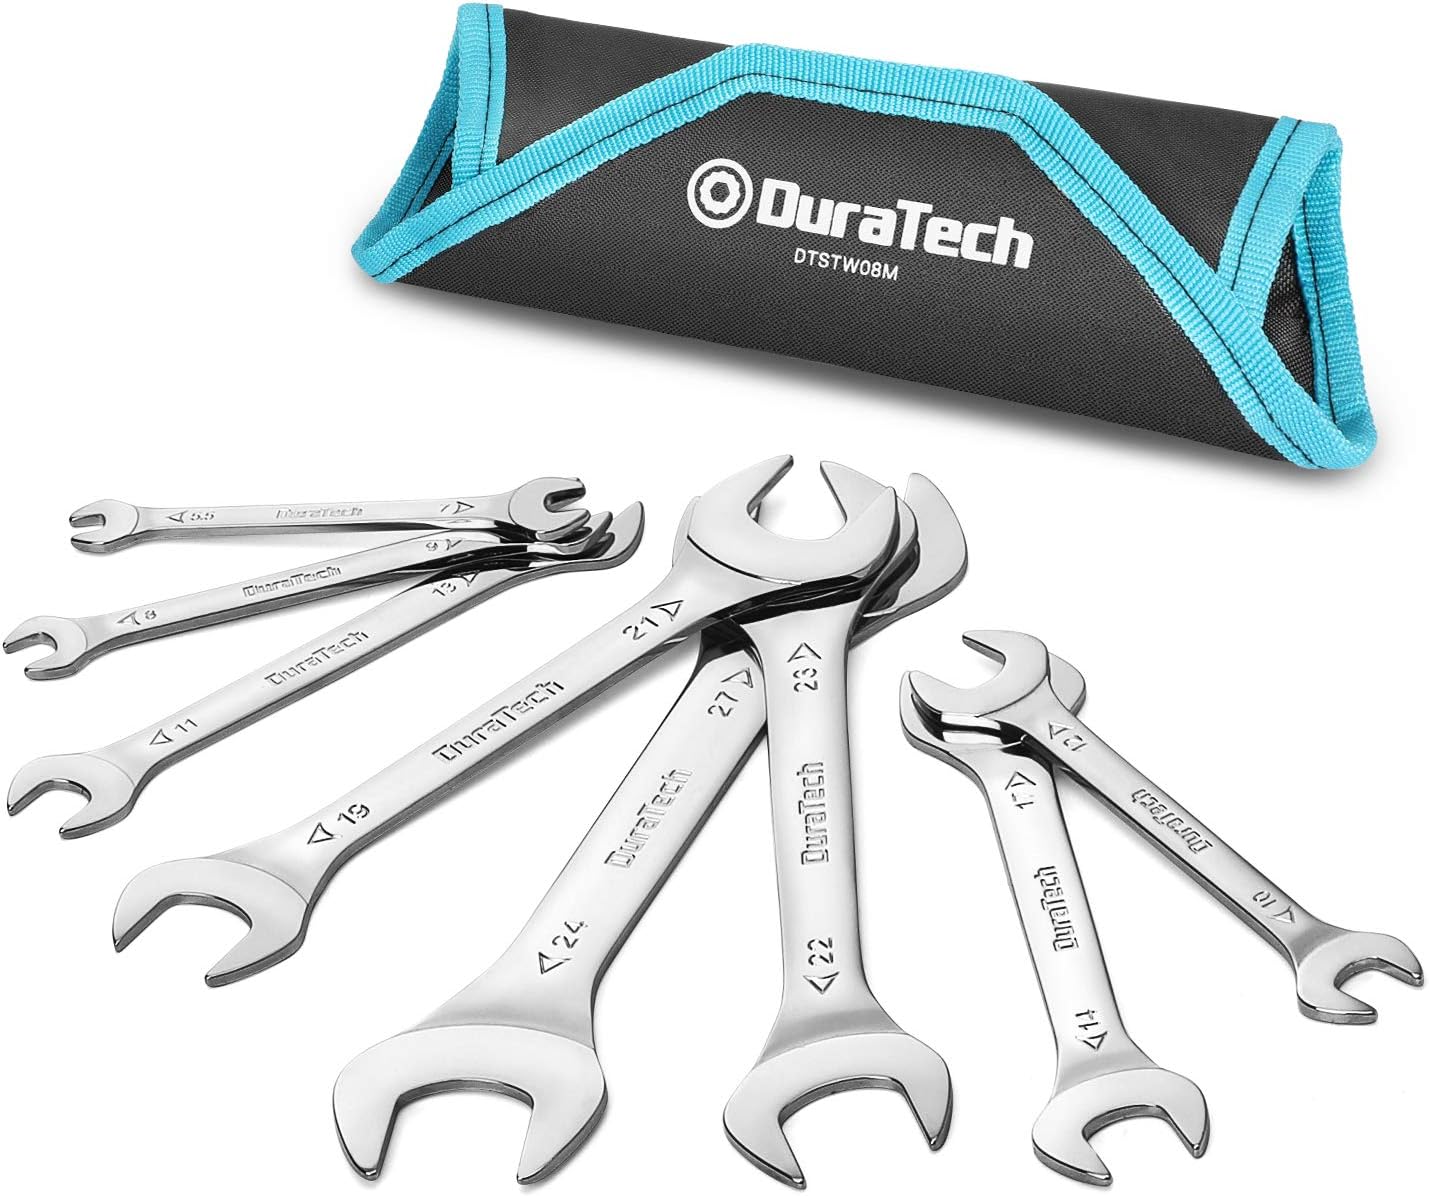 Read more about the article DURATECH Super-Thin Open End Wrench Set, Metric, 8-Piece, Including 5.5, 7, 8, 9, 10, 11, 12, 13, 14, 17, 19, 21, 22, 23, 24, 27 mm for ONLY $19.99 (Was $35.99)